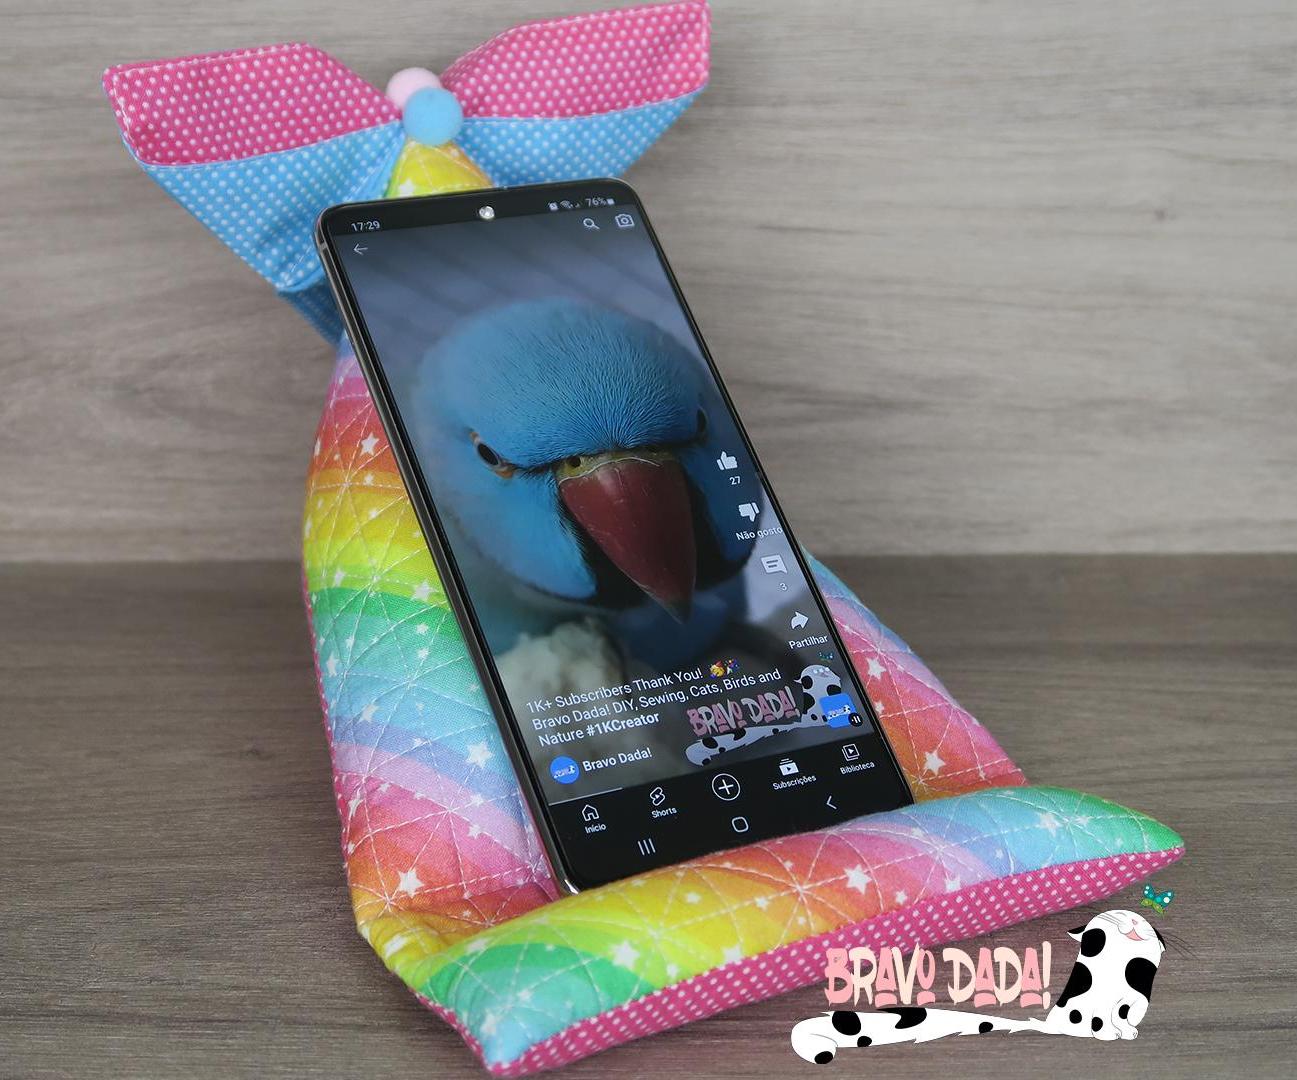 DIY How to Make a Quilted Electronic Device Pillow Stand + Fabric Origami Butterfly - Bravo Dada! Sewing Tutorial